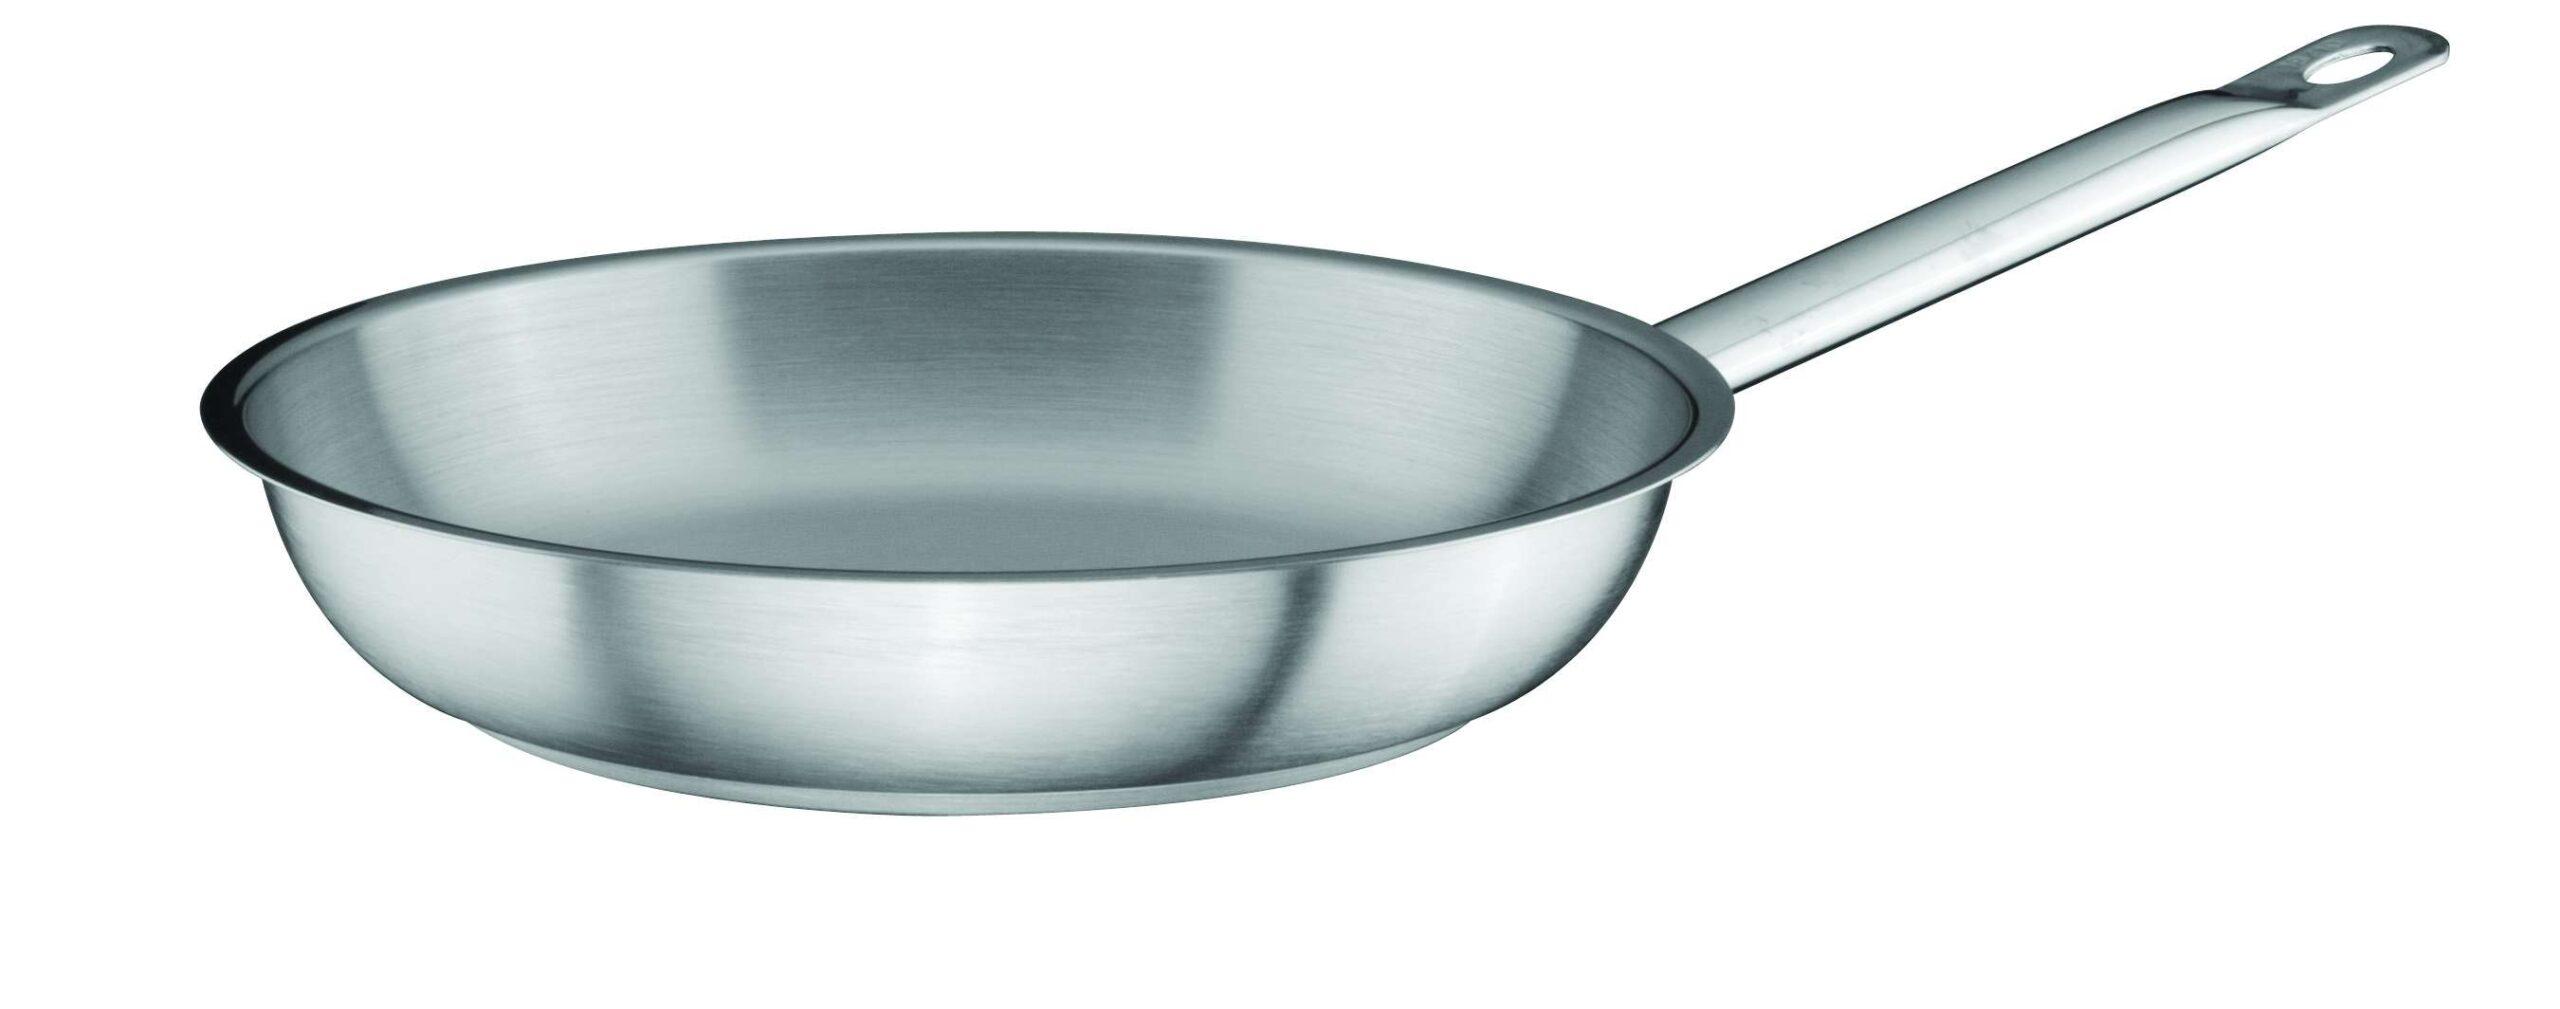 Ozti Stainless Steel Frypan 20 cm x 4 cm Silver Stainless Steel